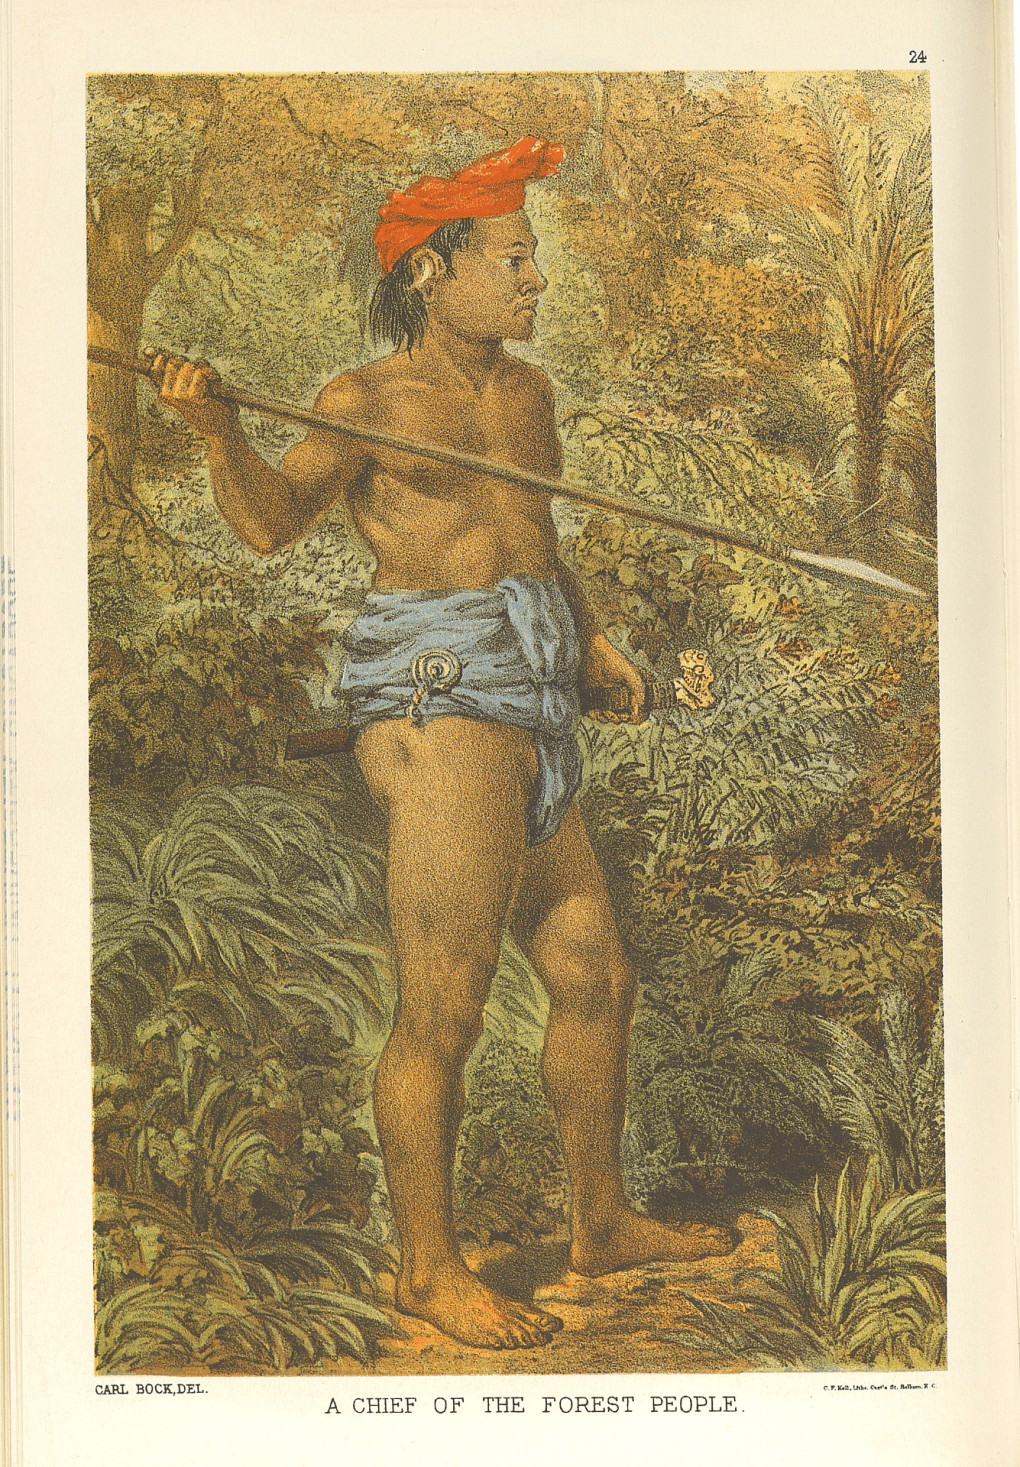 Sketch of a Chief of the forest people